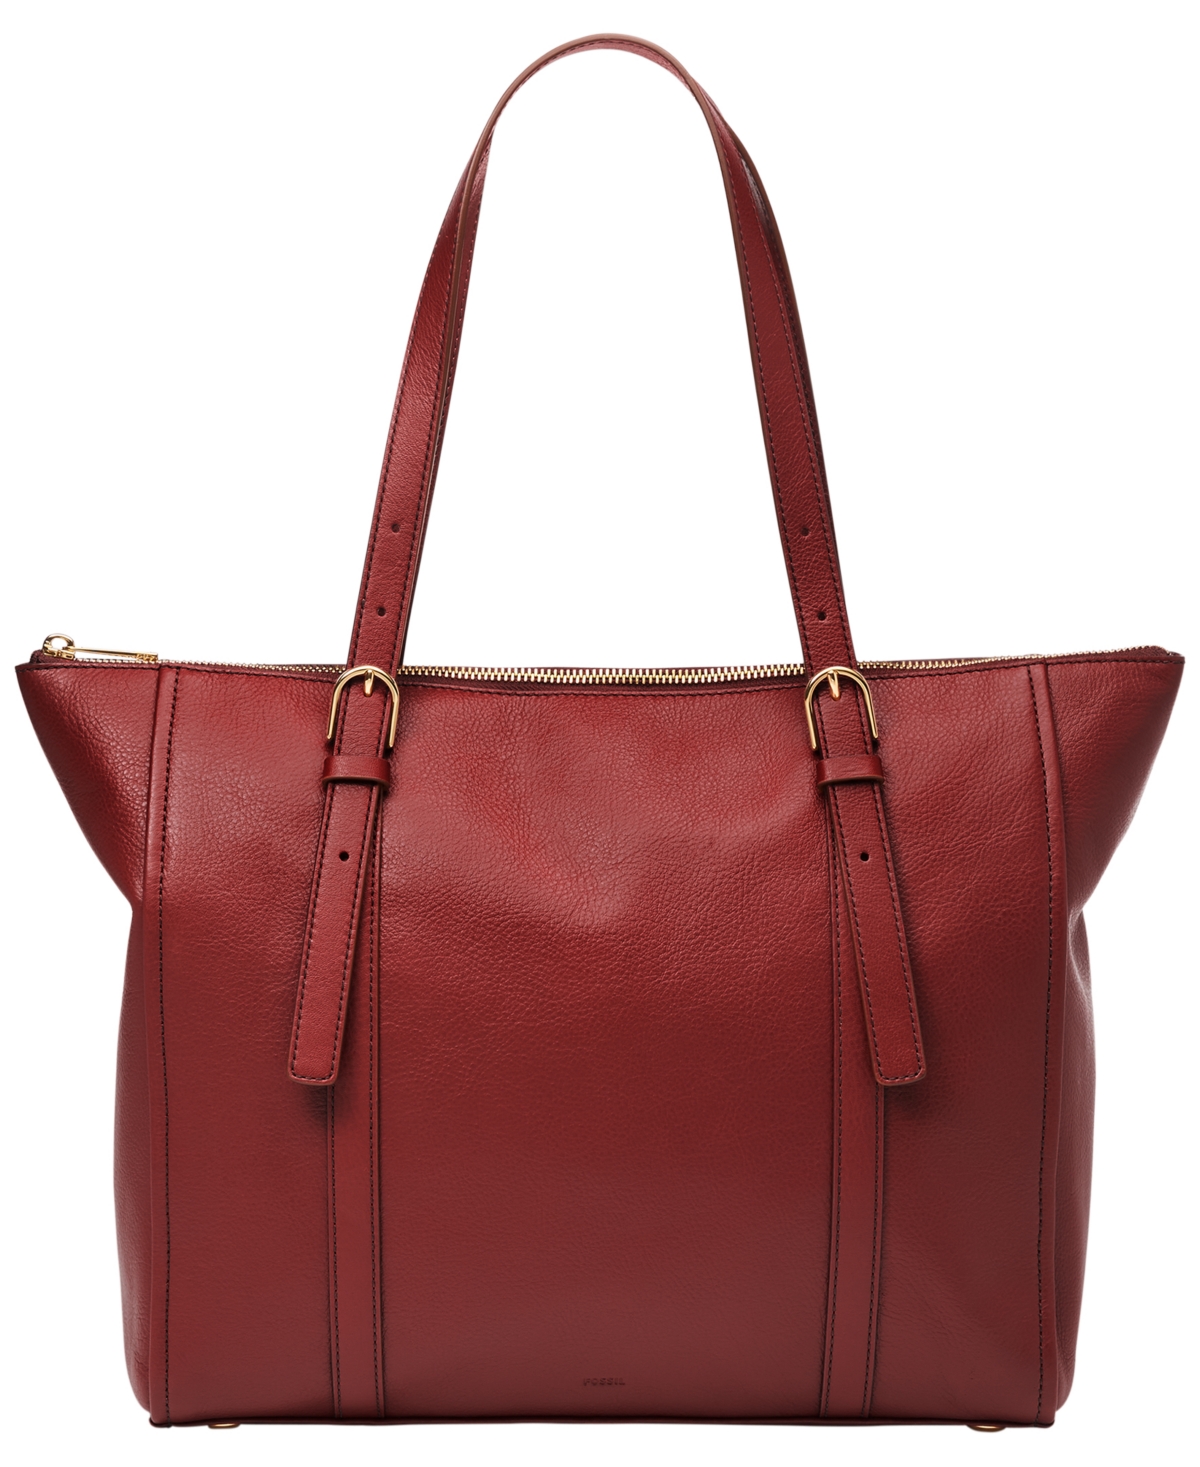 Fossil Carlie Leather Tote Bag In Scarlet